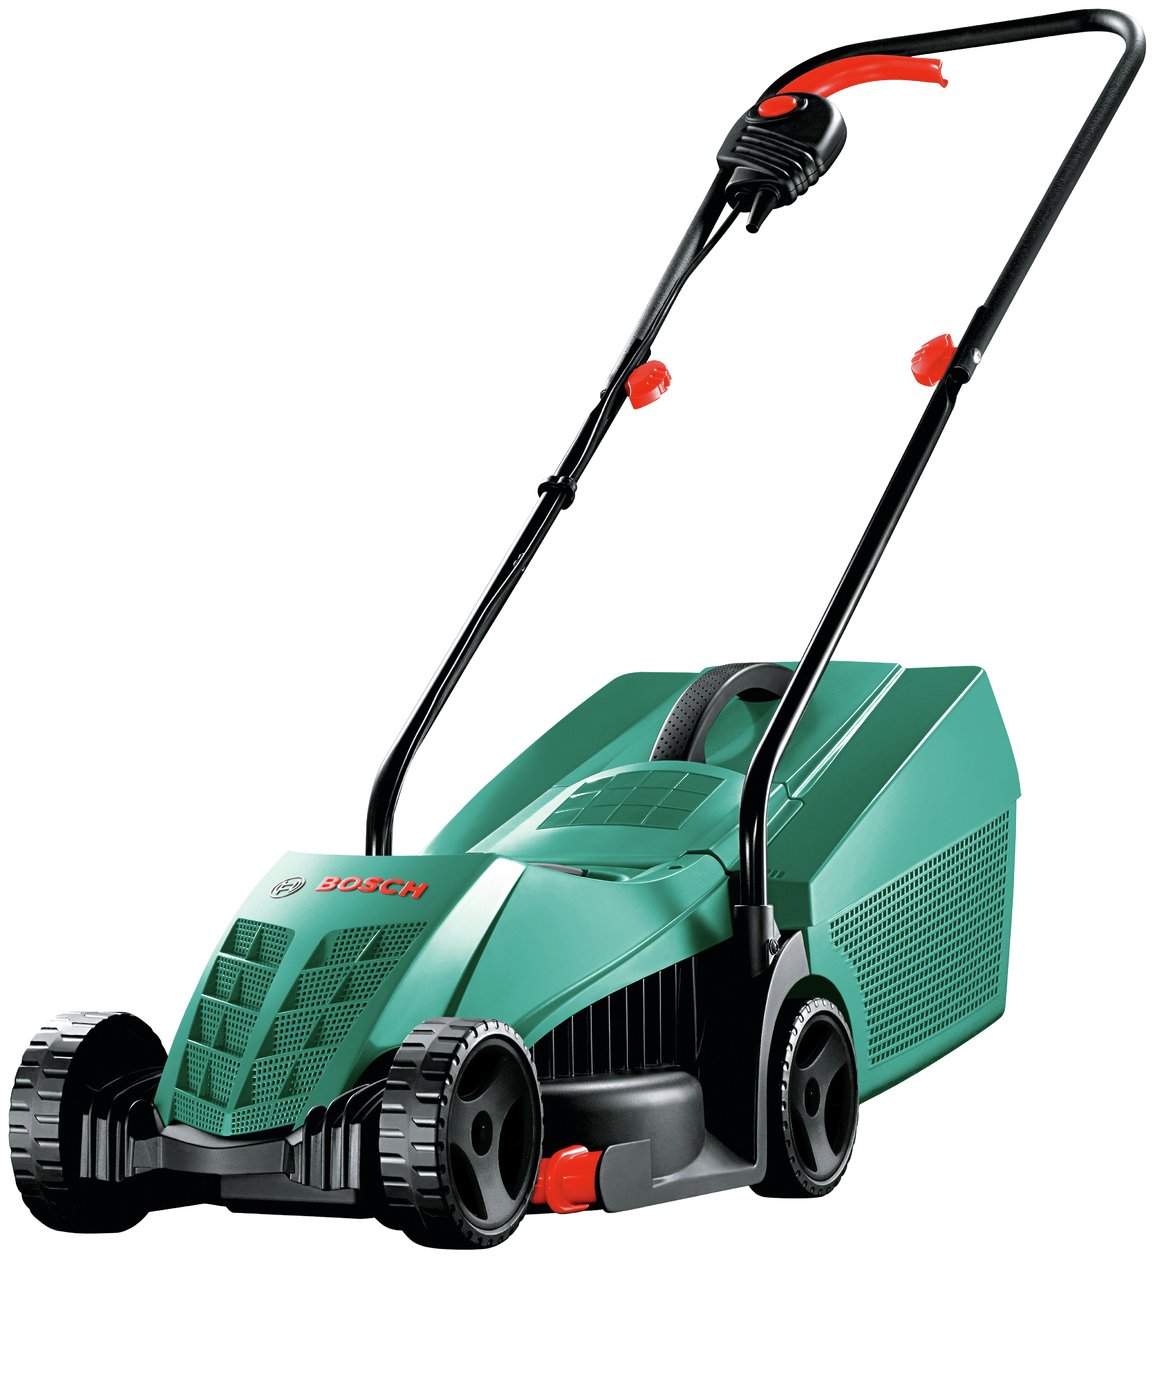 Image of Save Over &pound14.00: Bosch 32cm Corded Rotary Lawnmower - 1200W